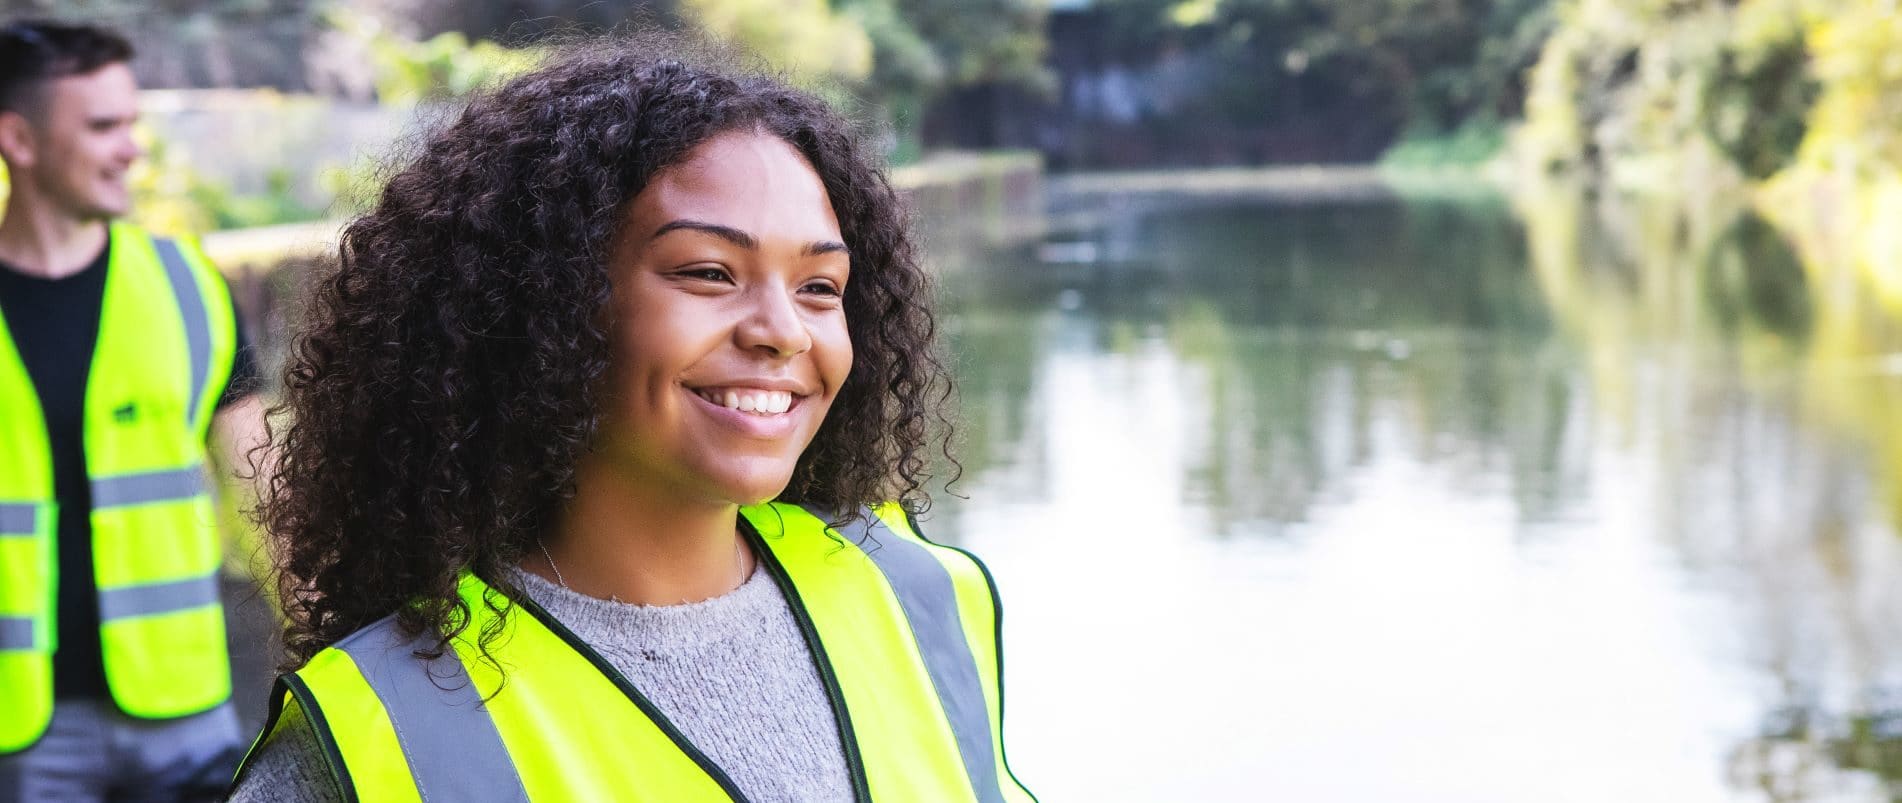 A young woman in a high vis jacket